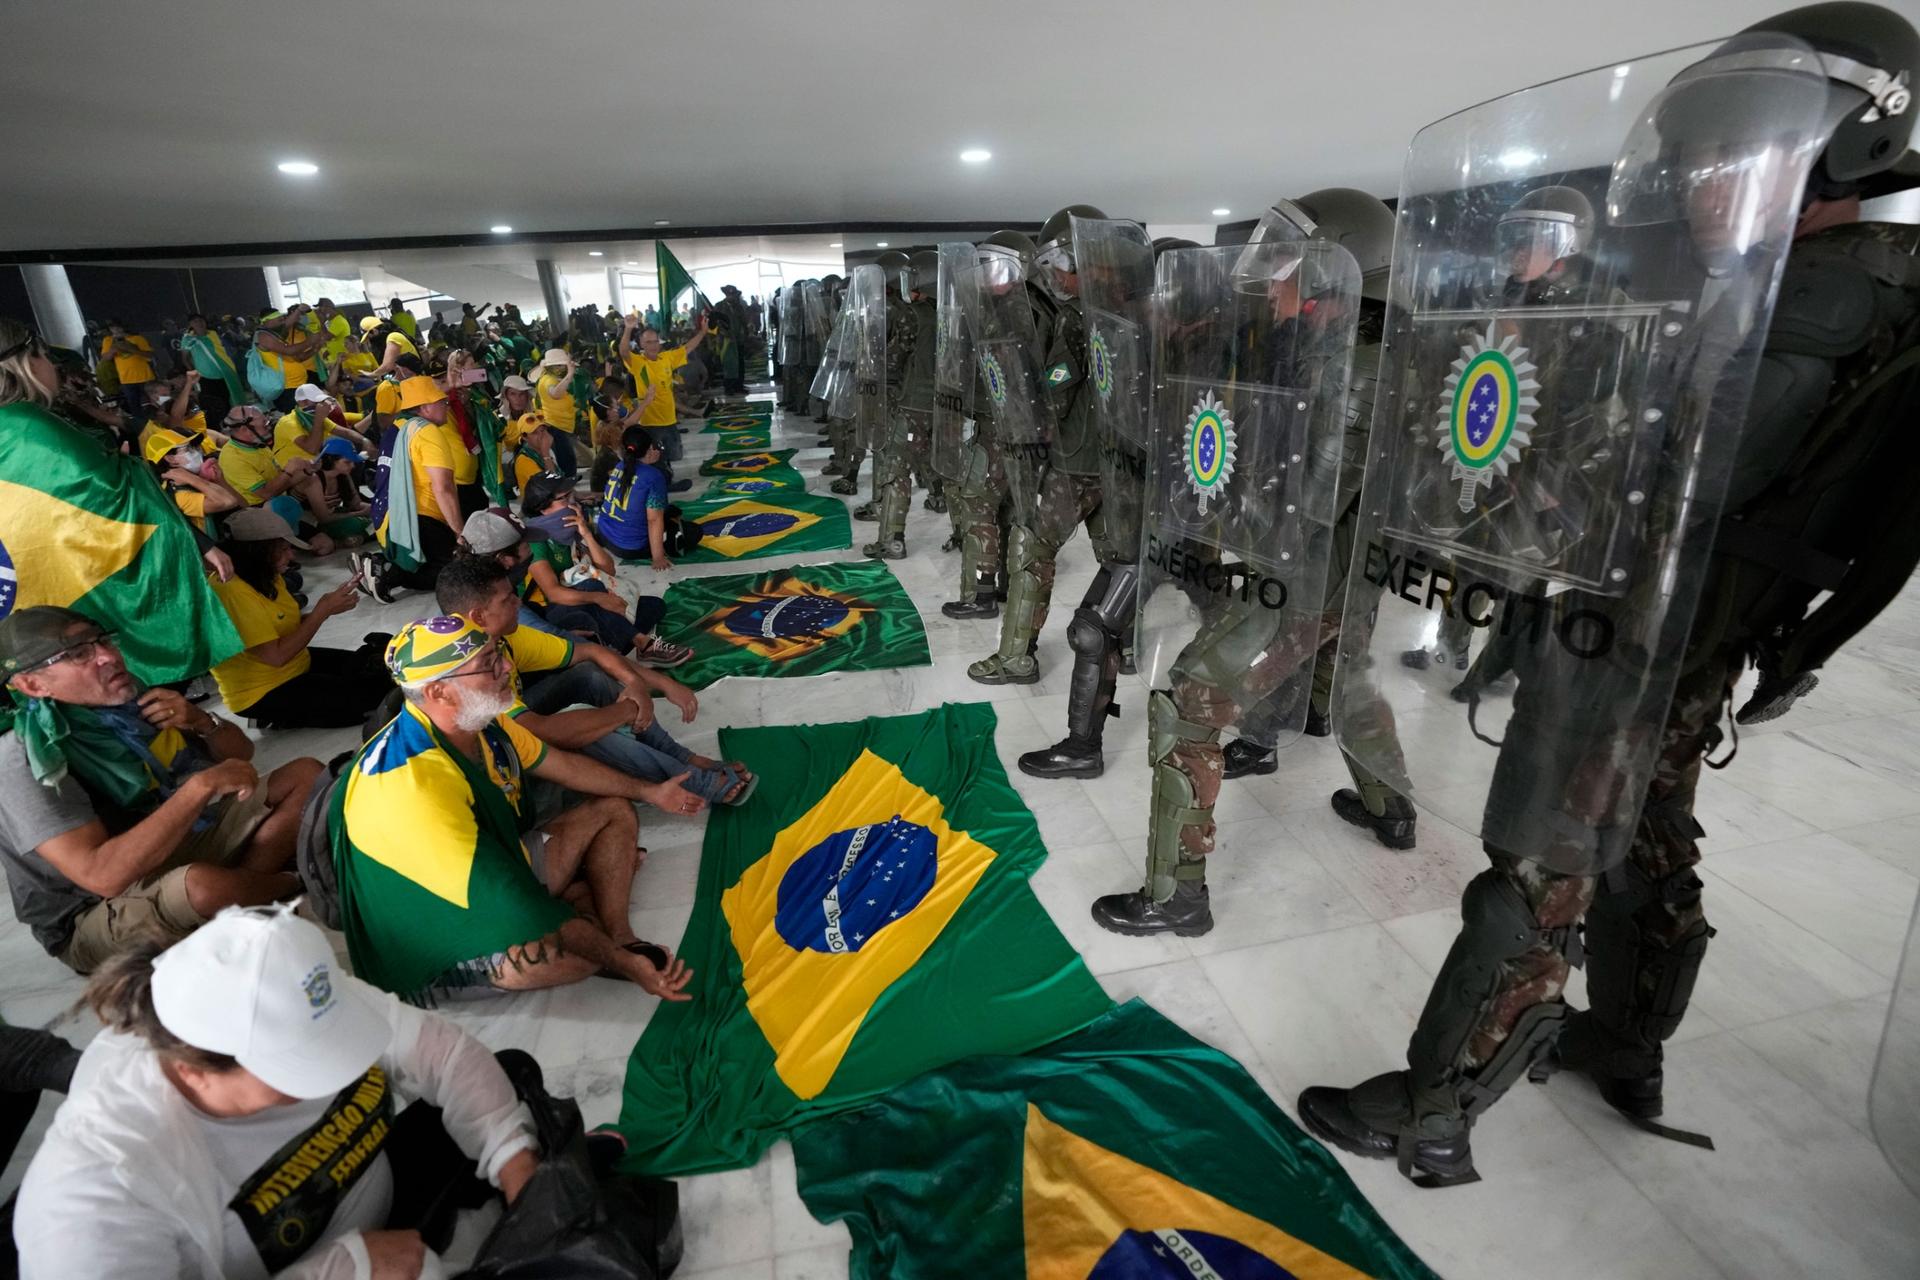 Supporters of Brazil's former President Jair Bolsonaro, sit in front of police inside the Planalto Palace after storming it, in Brasilia, Brazil, Jan. 8, 2023. 